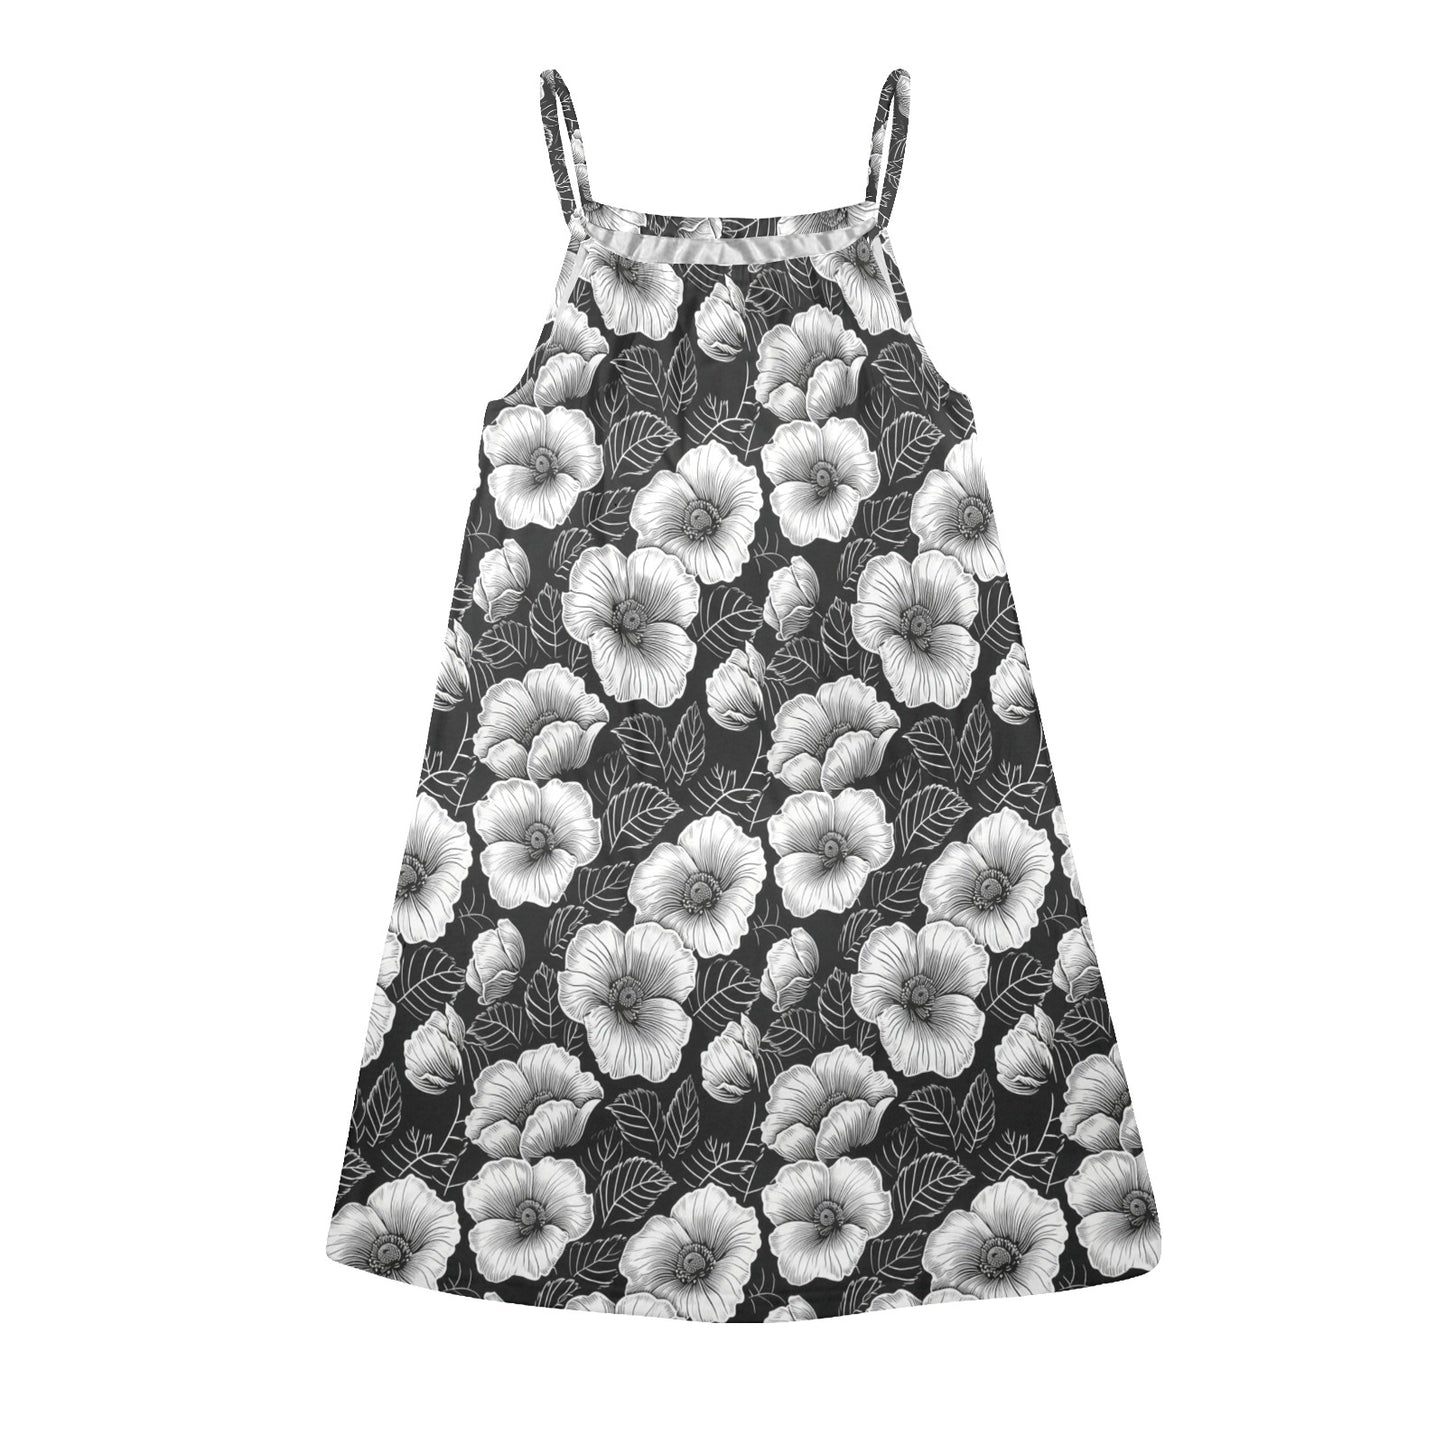 Black and White Floral Women Dress, Flowers Evening Summer Sleeveless Cocktail Mini Cute Ladies Handmade Designer Tank Outfits Plus Size